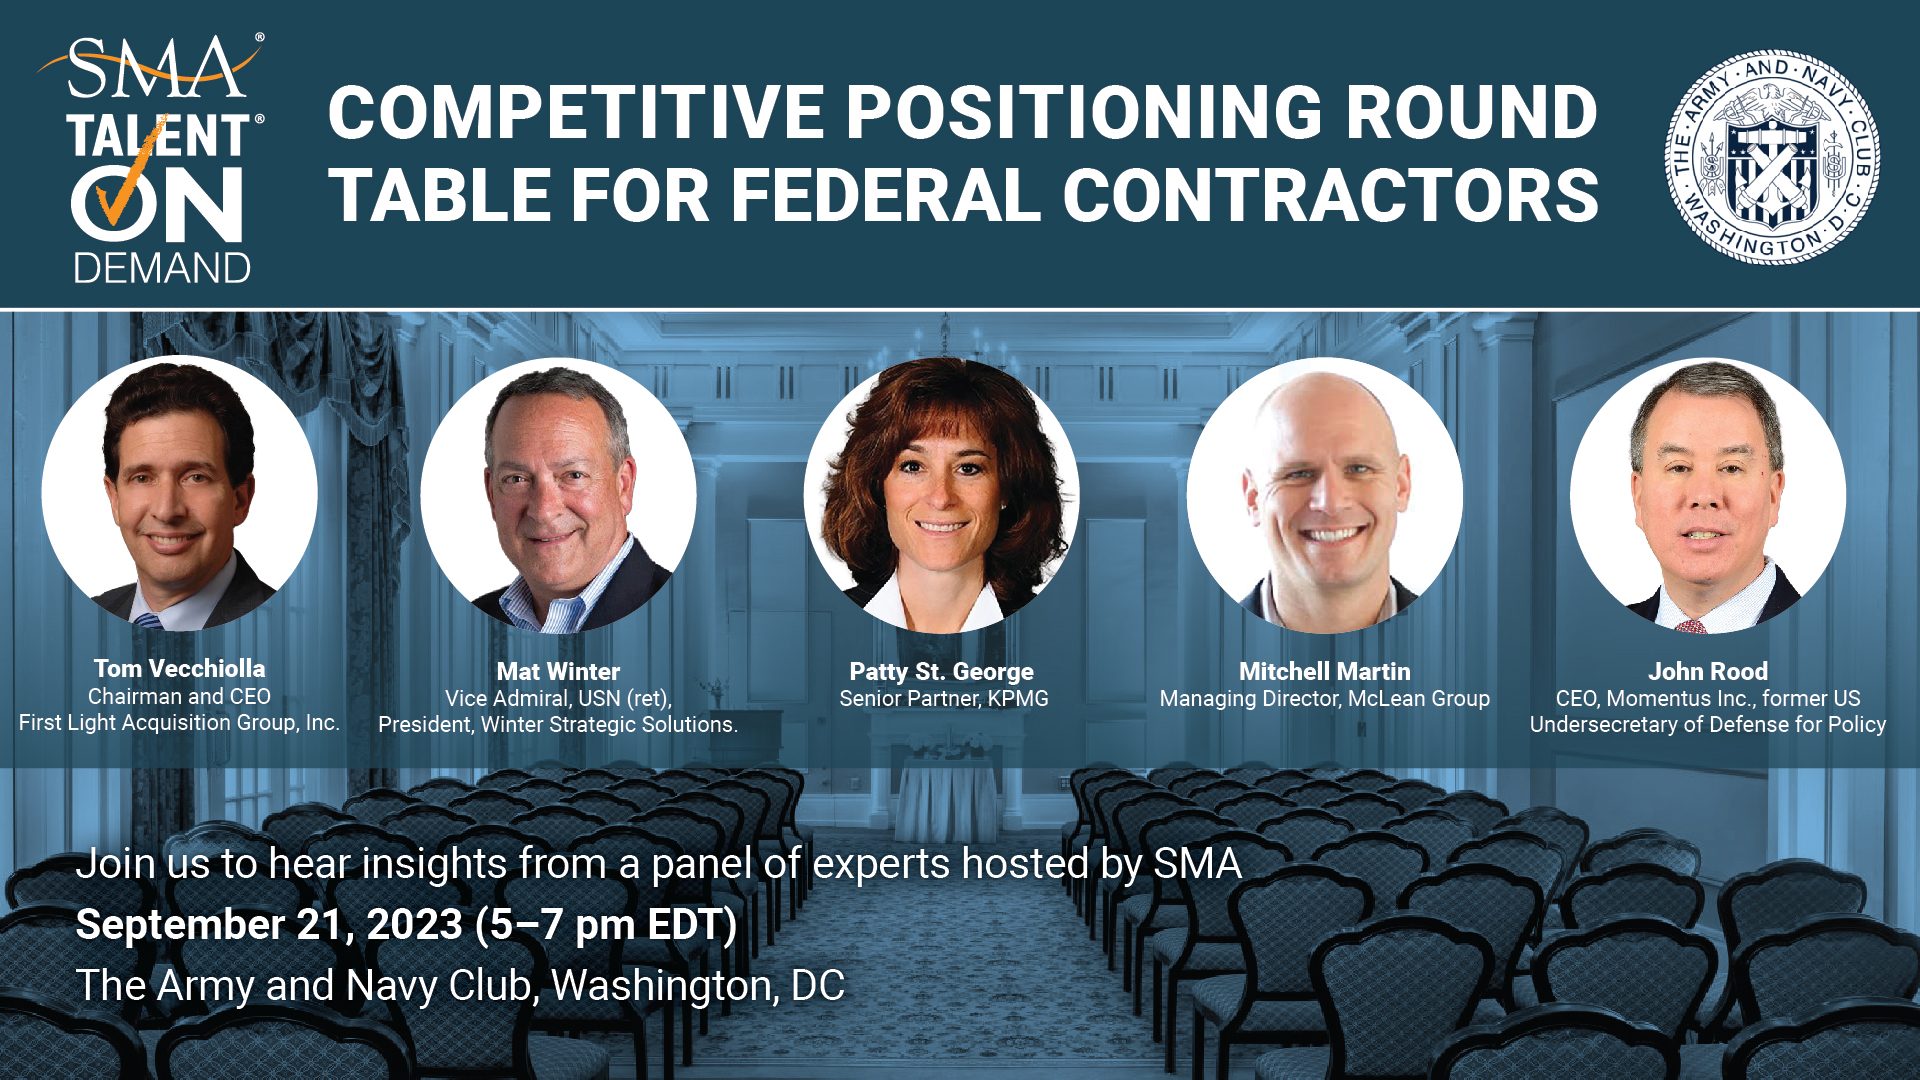 Competitive Positioning Round Table for Federal Contractors with Tom Vecchiolla, Mat Winter, Patty St. George, Mitchell Martin, and John Rood